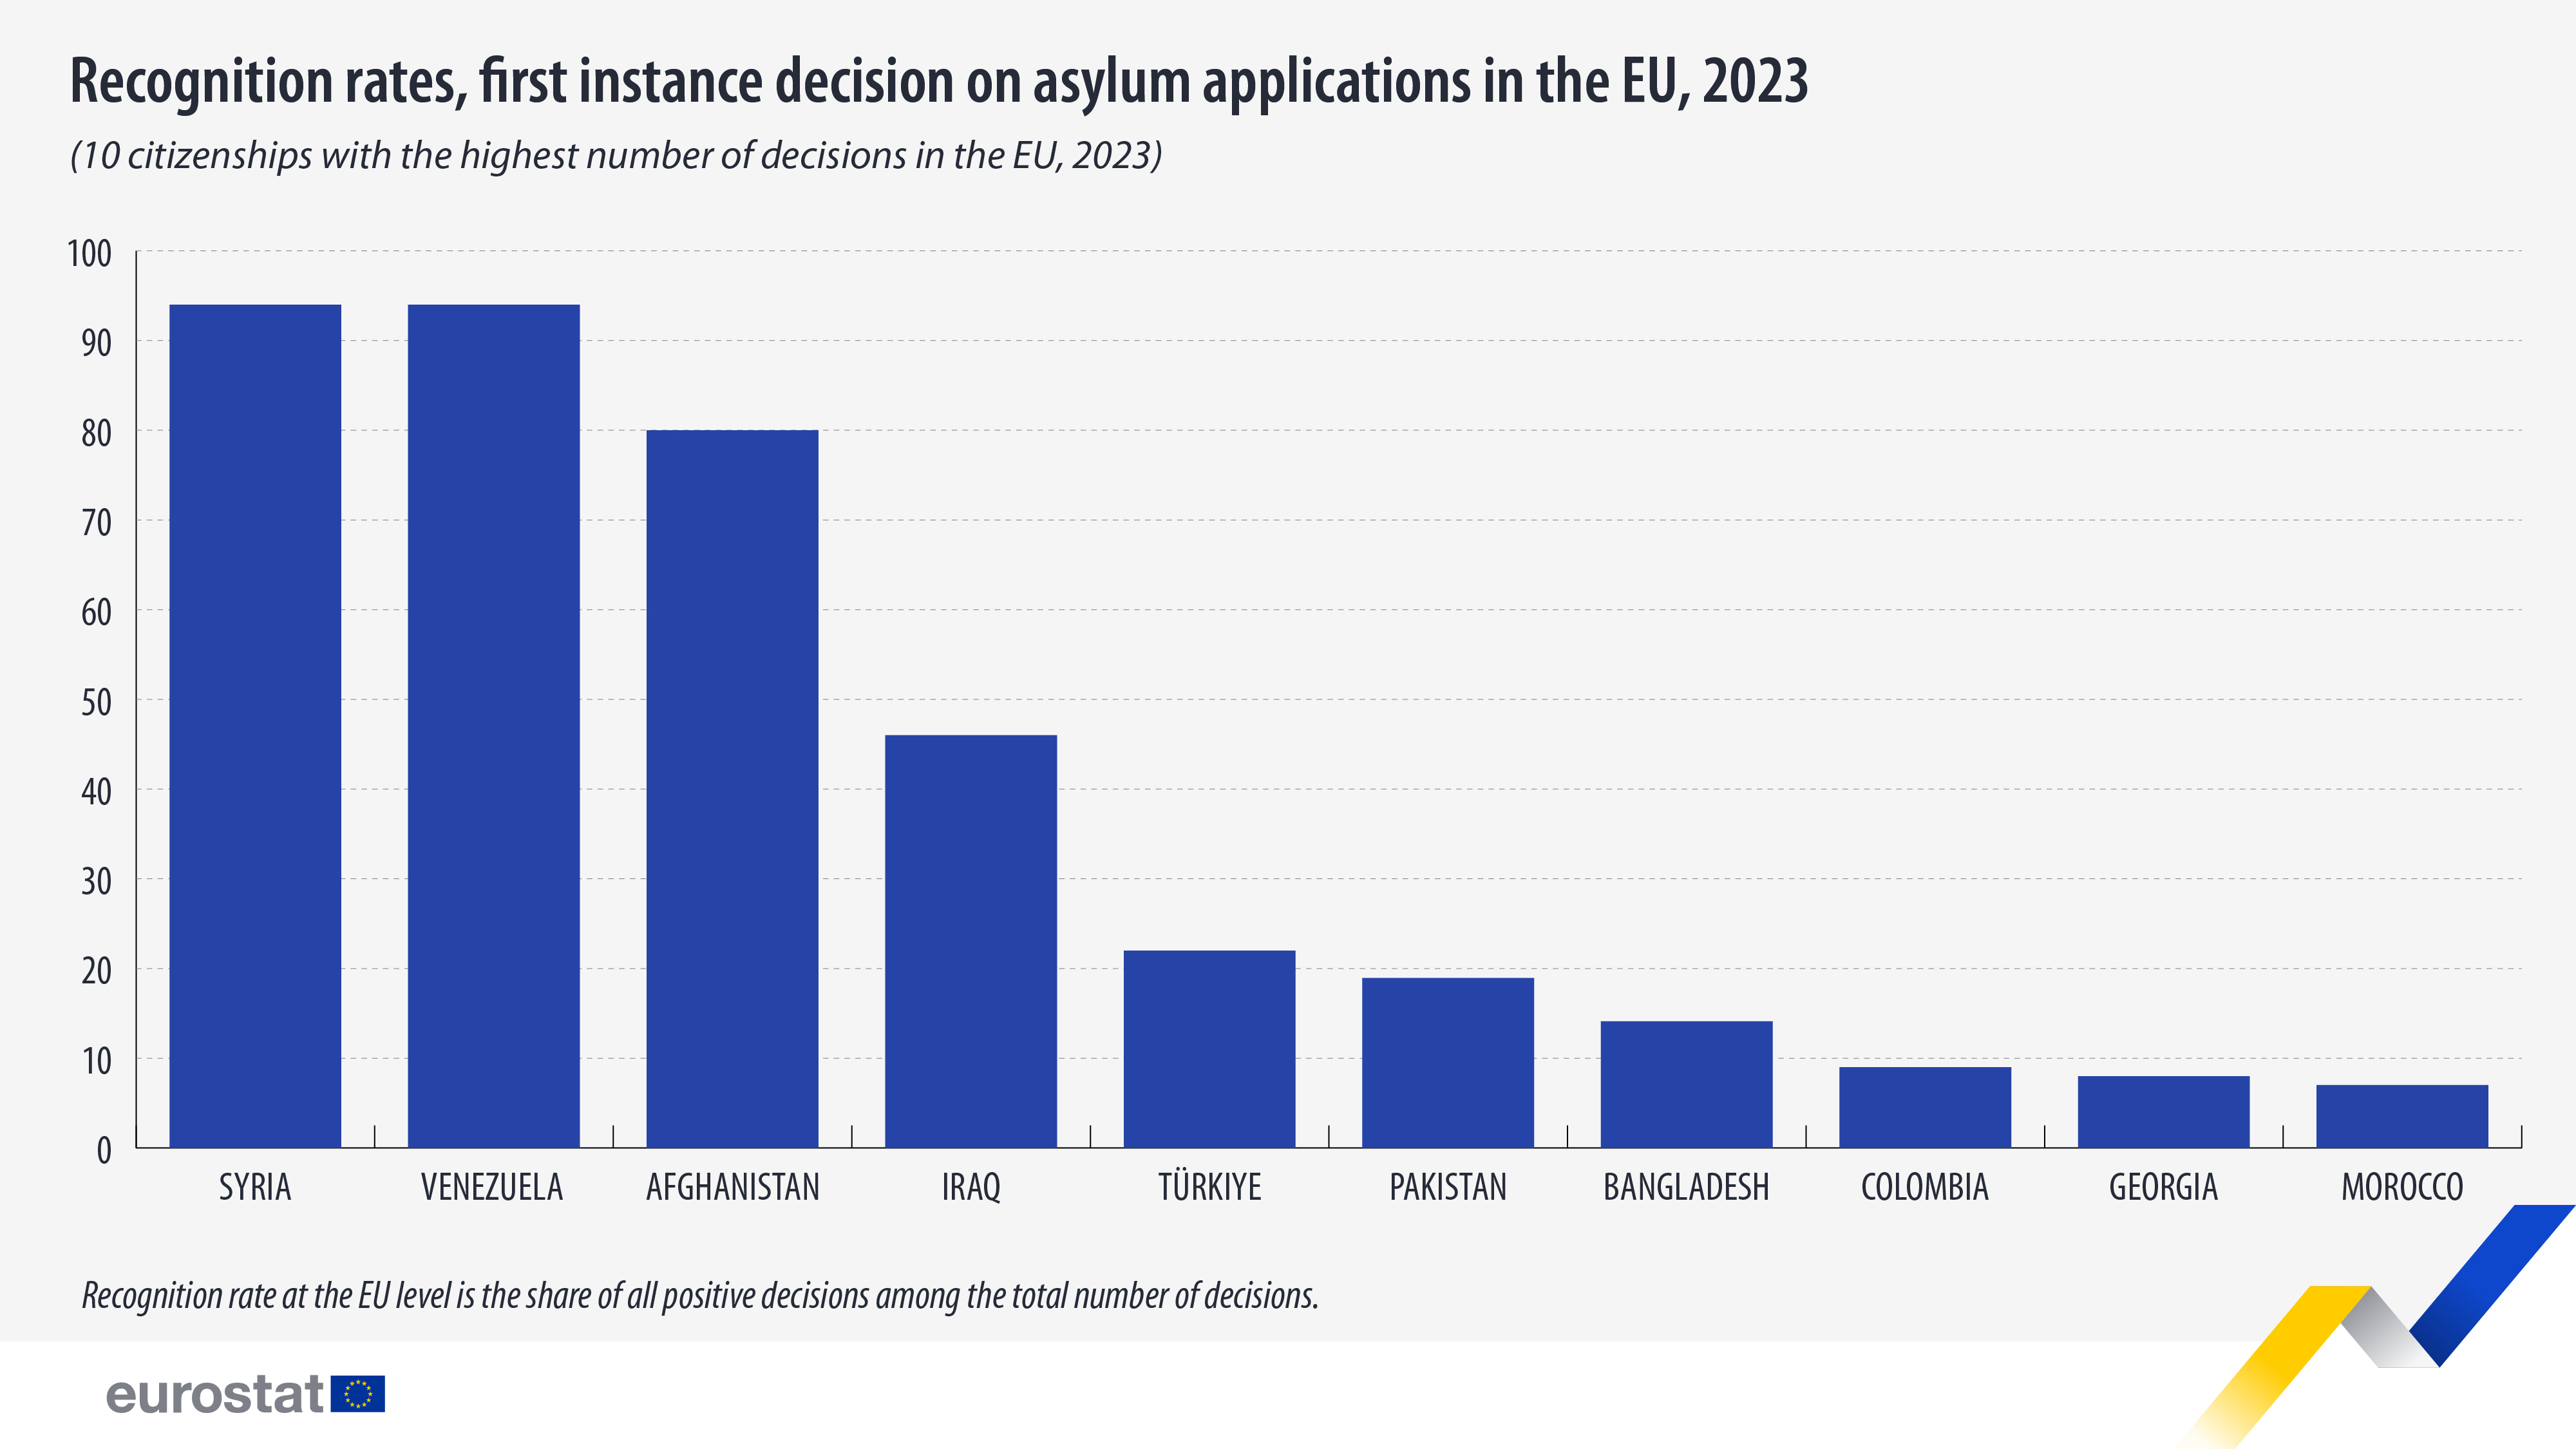 Recognition rates, first instance decision on asylum applications in the EU, 2023, 10 citizenships with the highest number of decisions in the EU. Chart. See link to full dataset below.